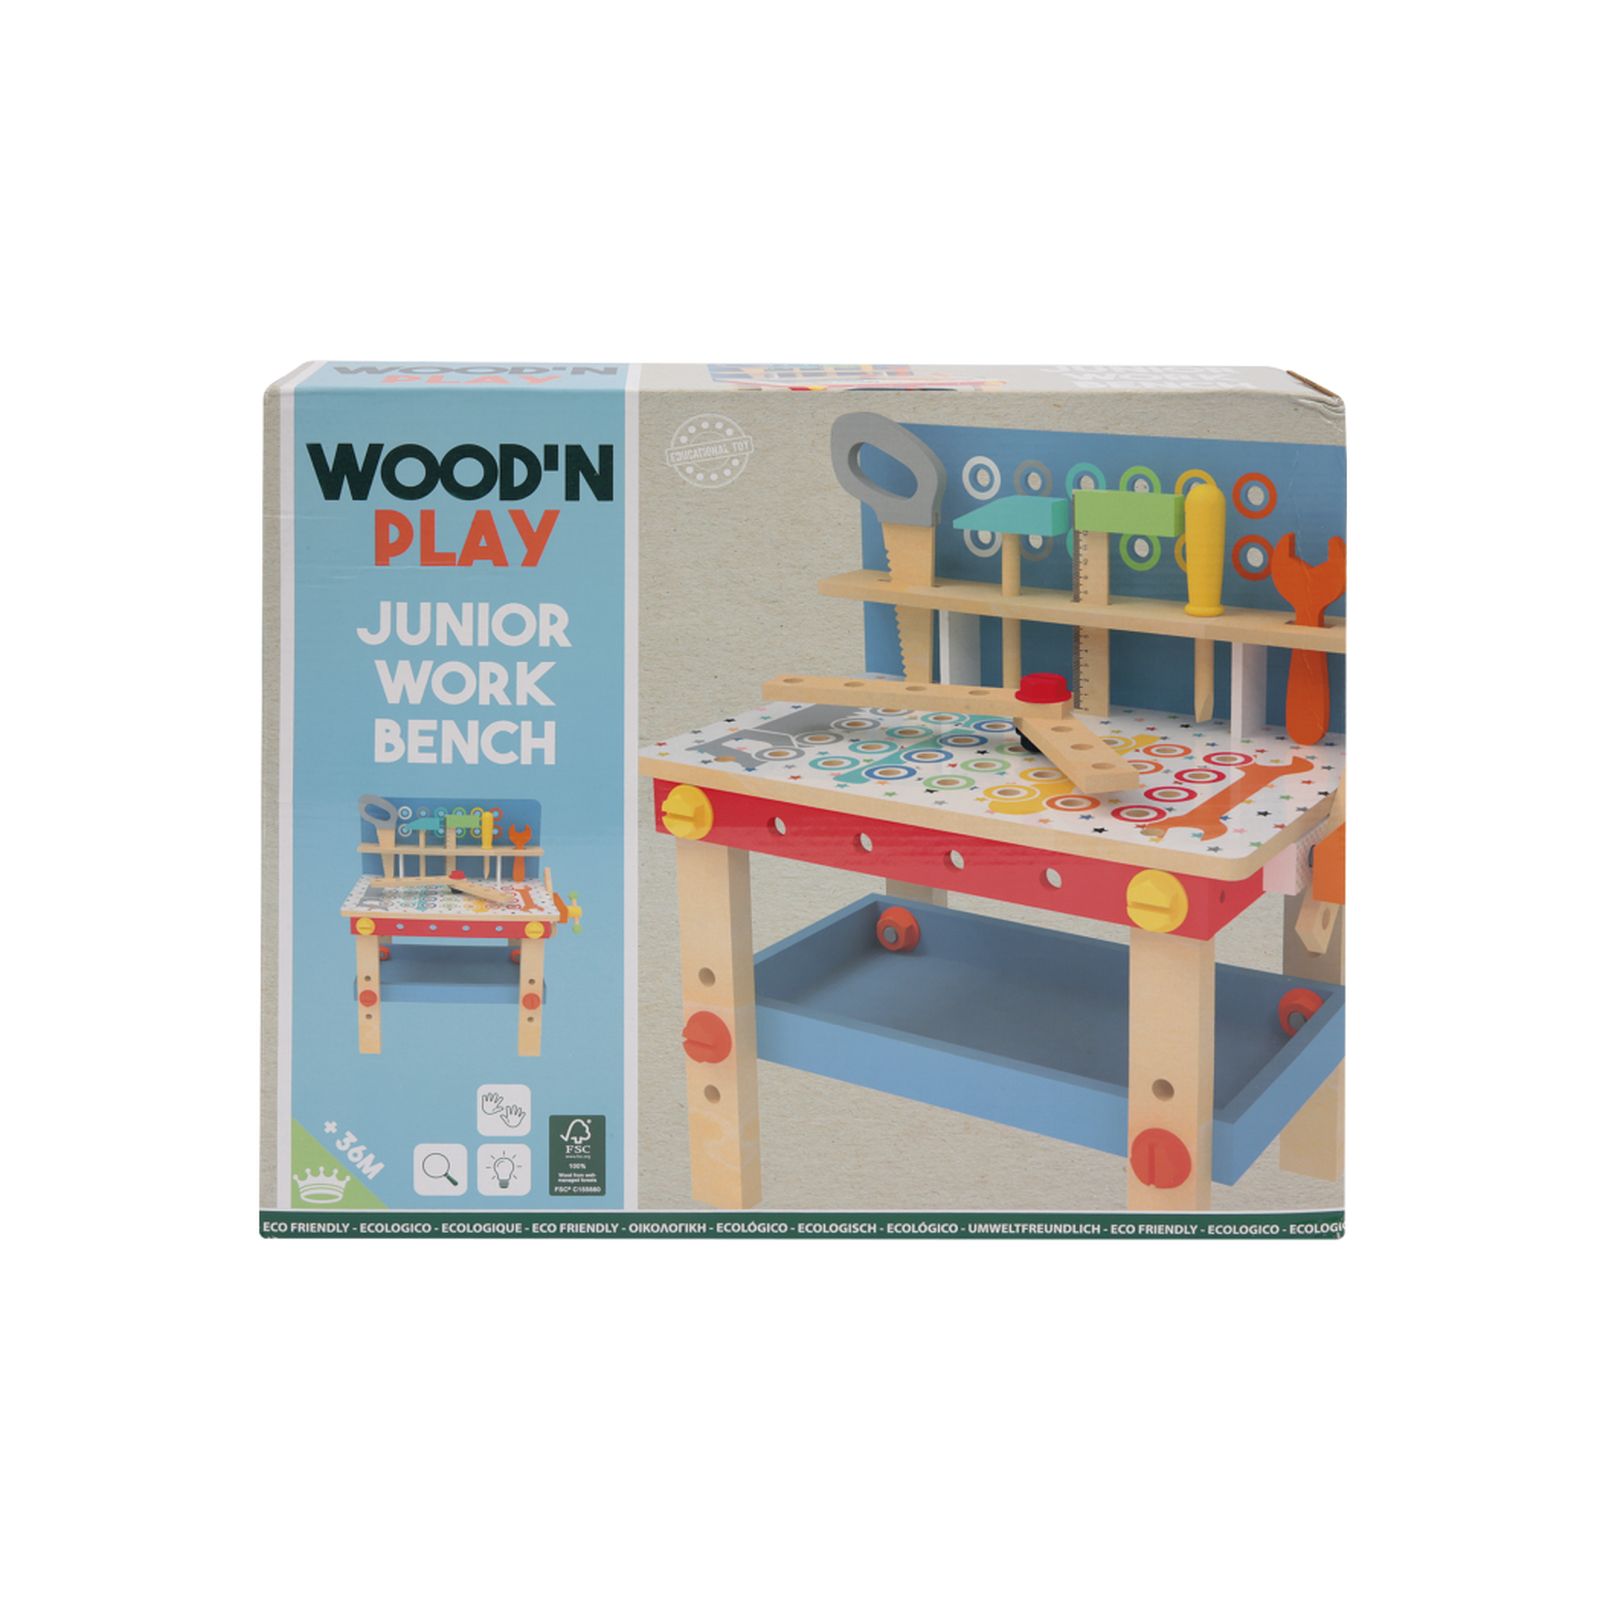 Banchetto lavoro - WOOD 'N' PLAY